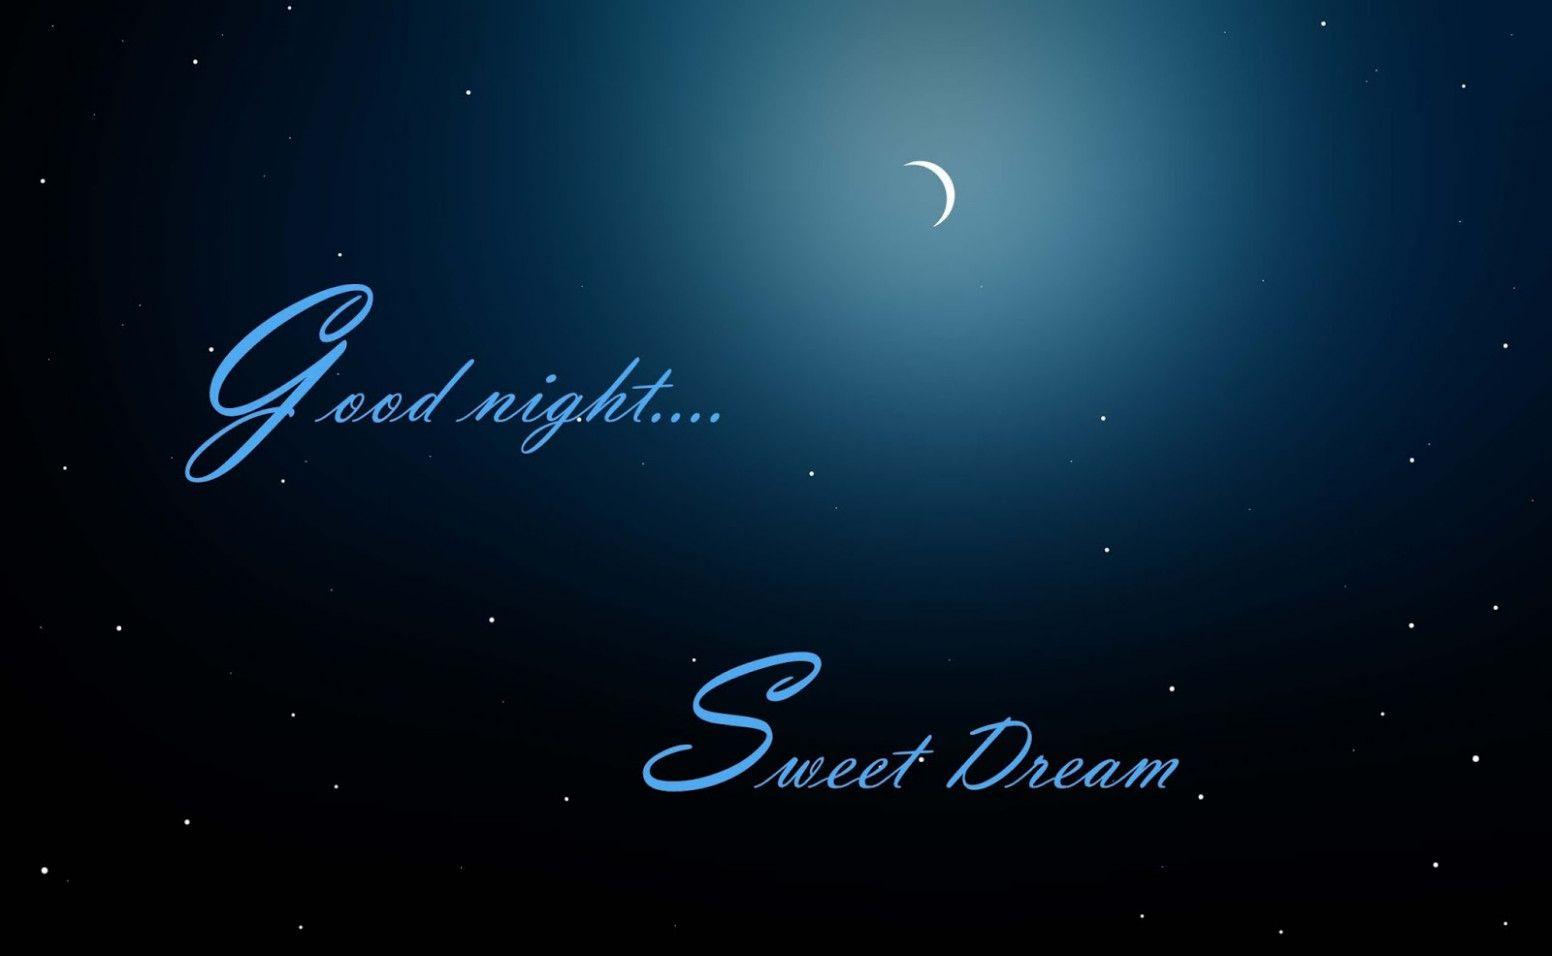 Best Good night HD Image, 20D Picture, Photo, Quotes, Wallpaper